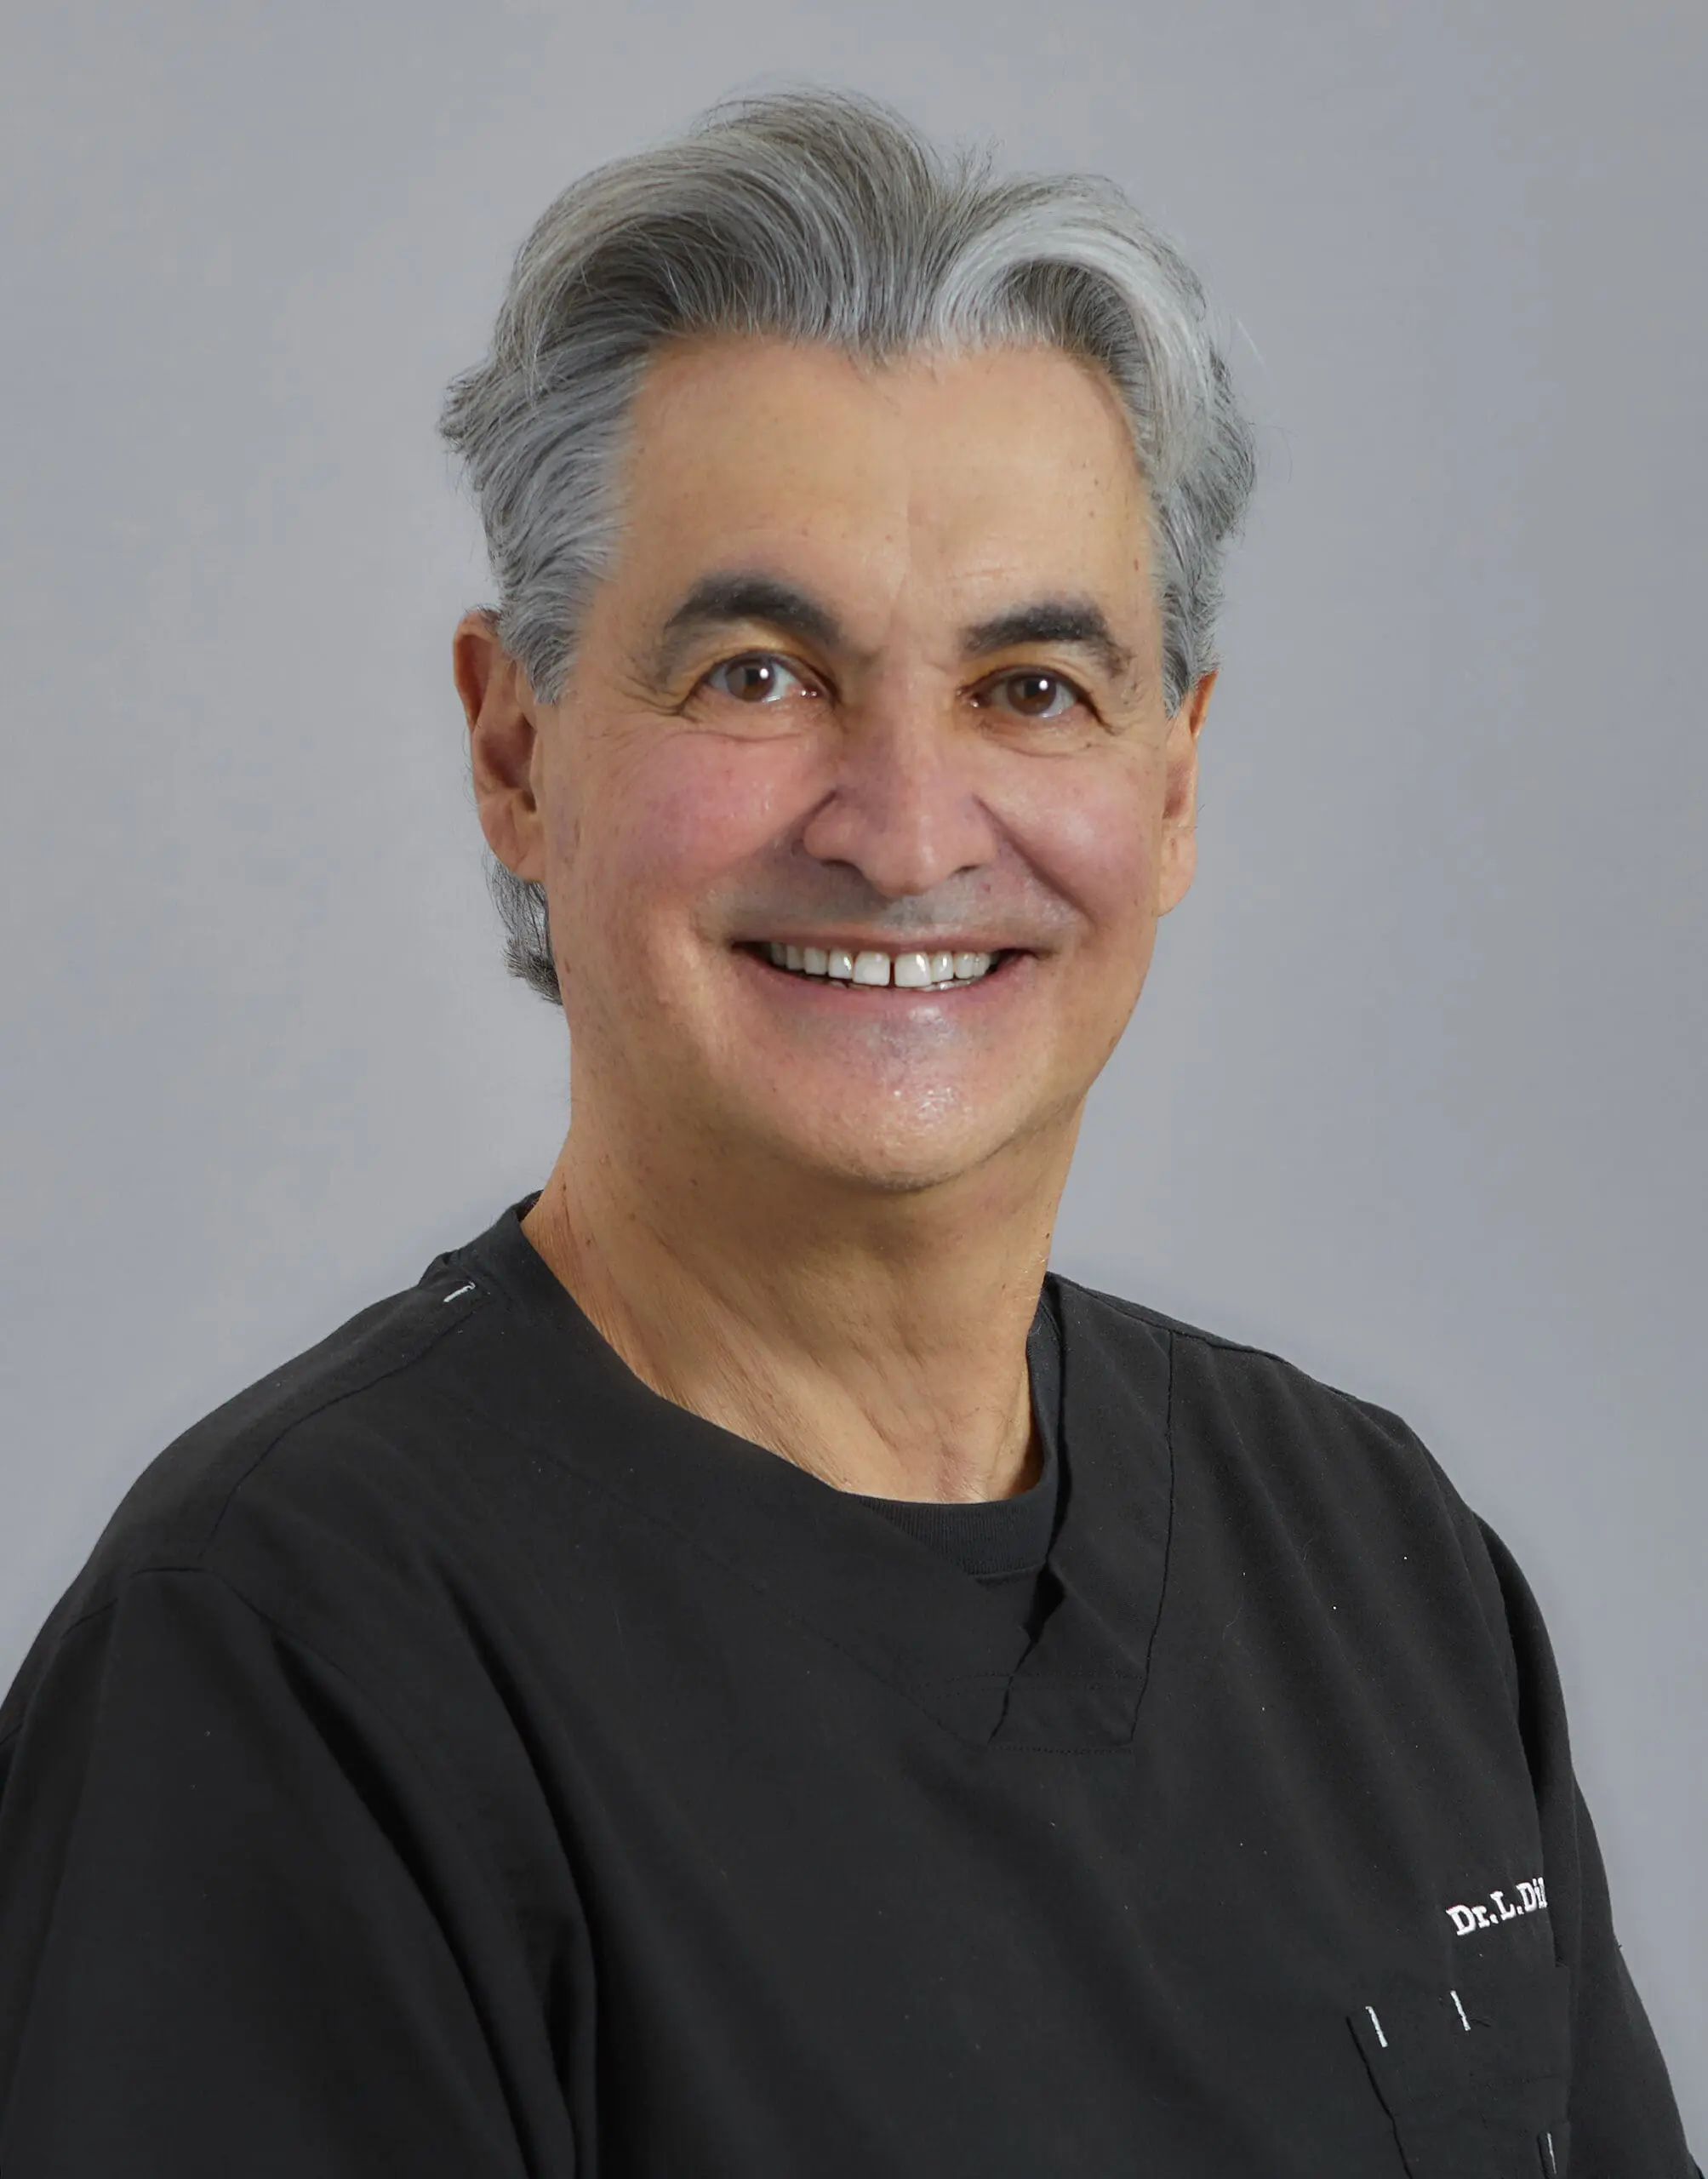 A photo of Dr. Leonard Di Paolo, a general dentist, smiling warmly.